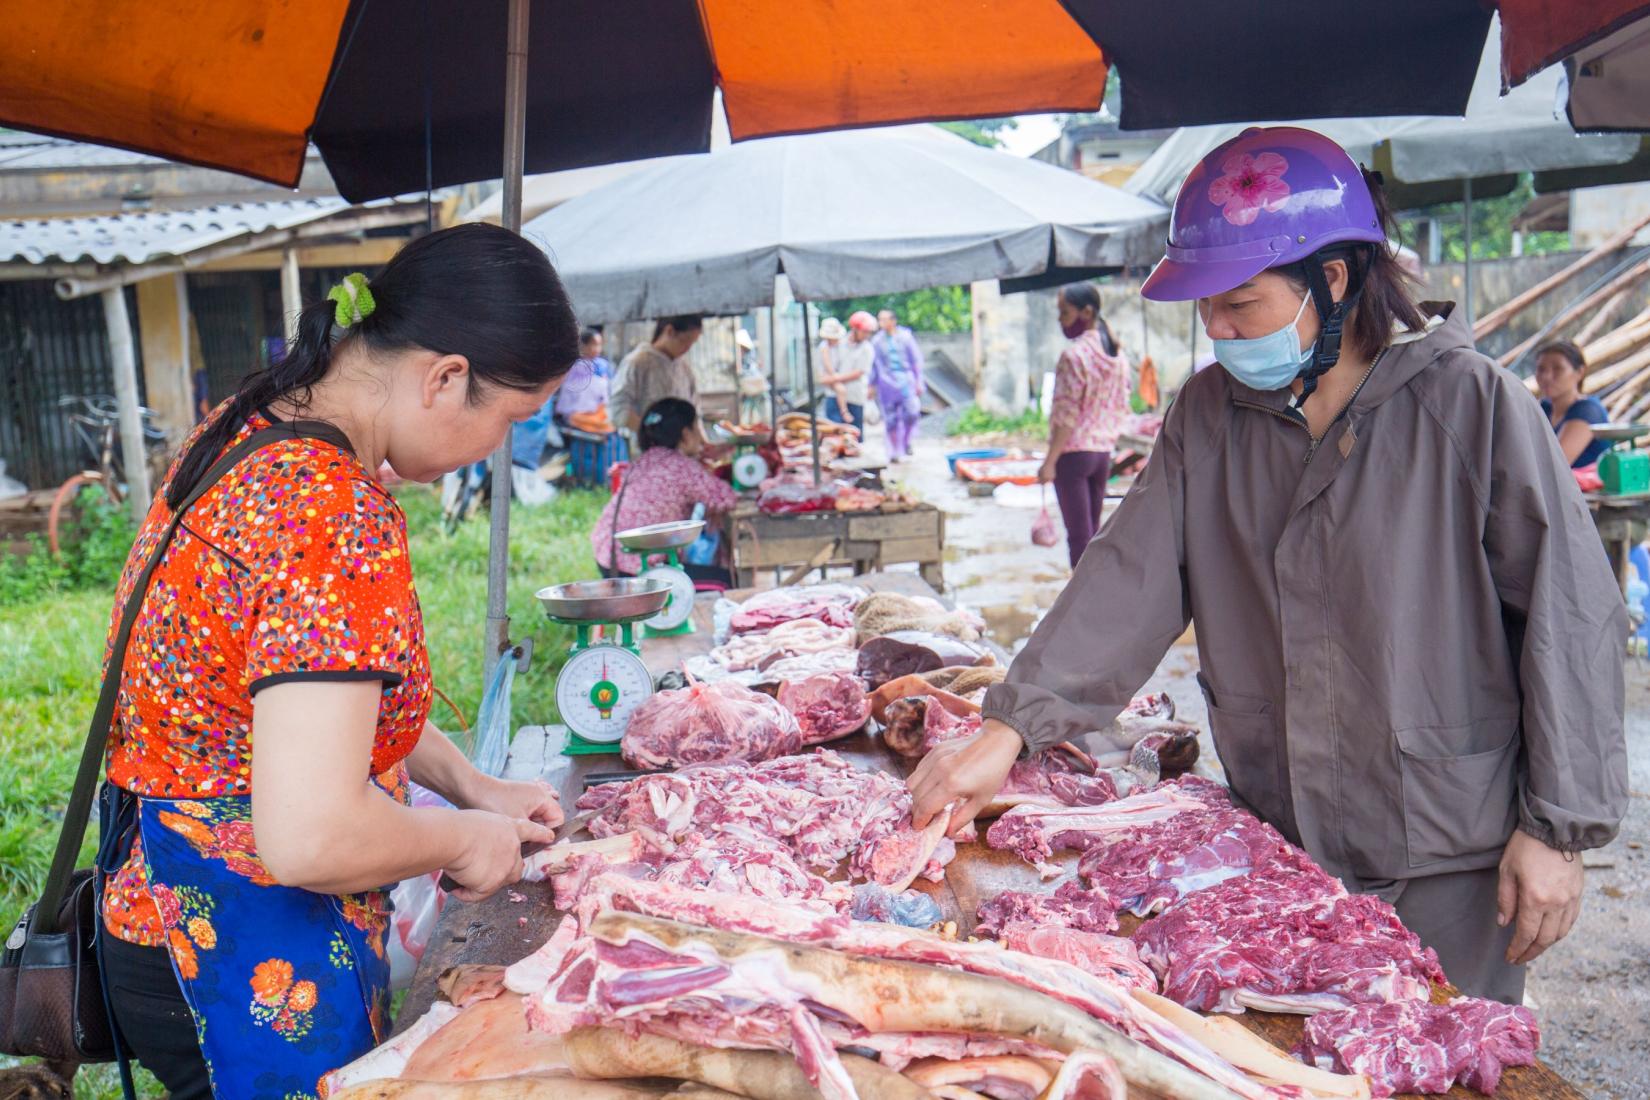 Vendor at market stall cutting meat with another person inspecting meat